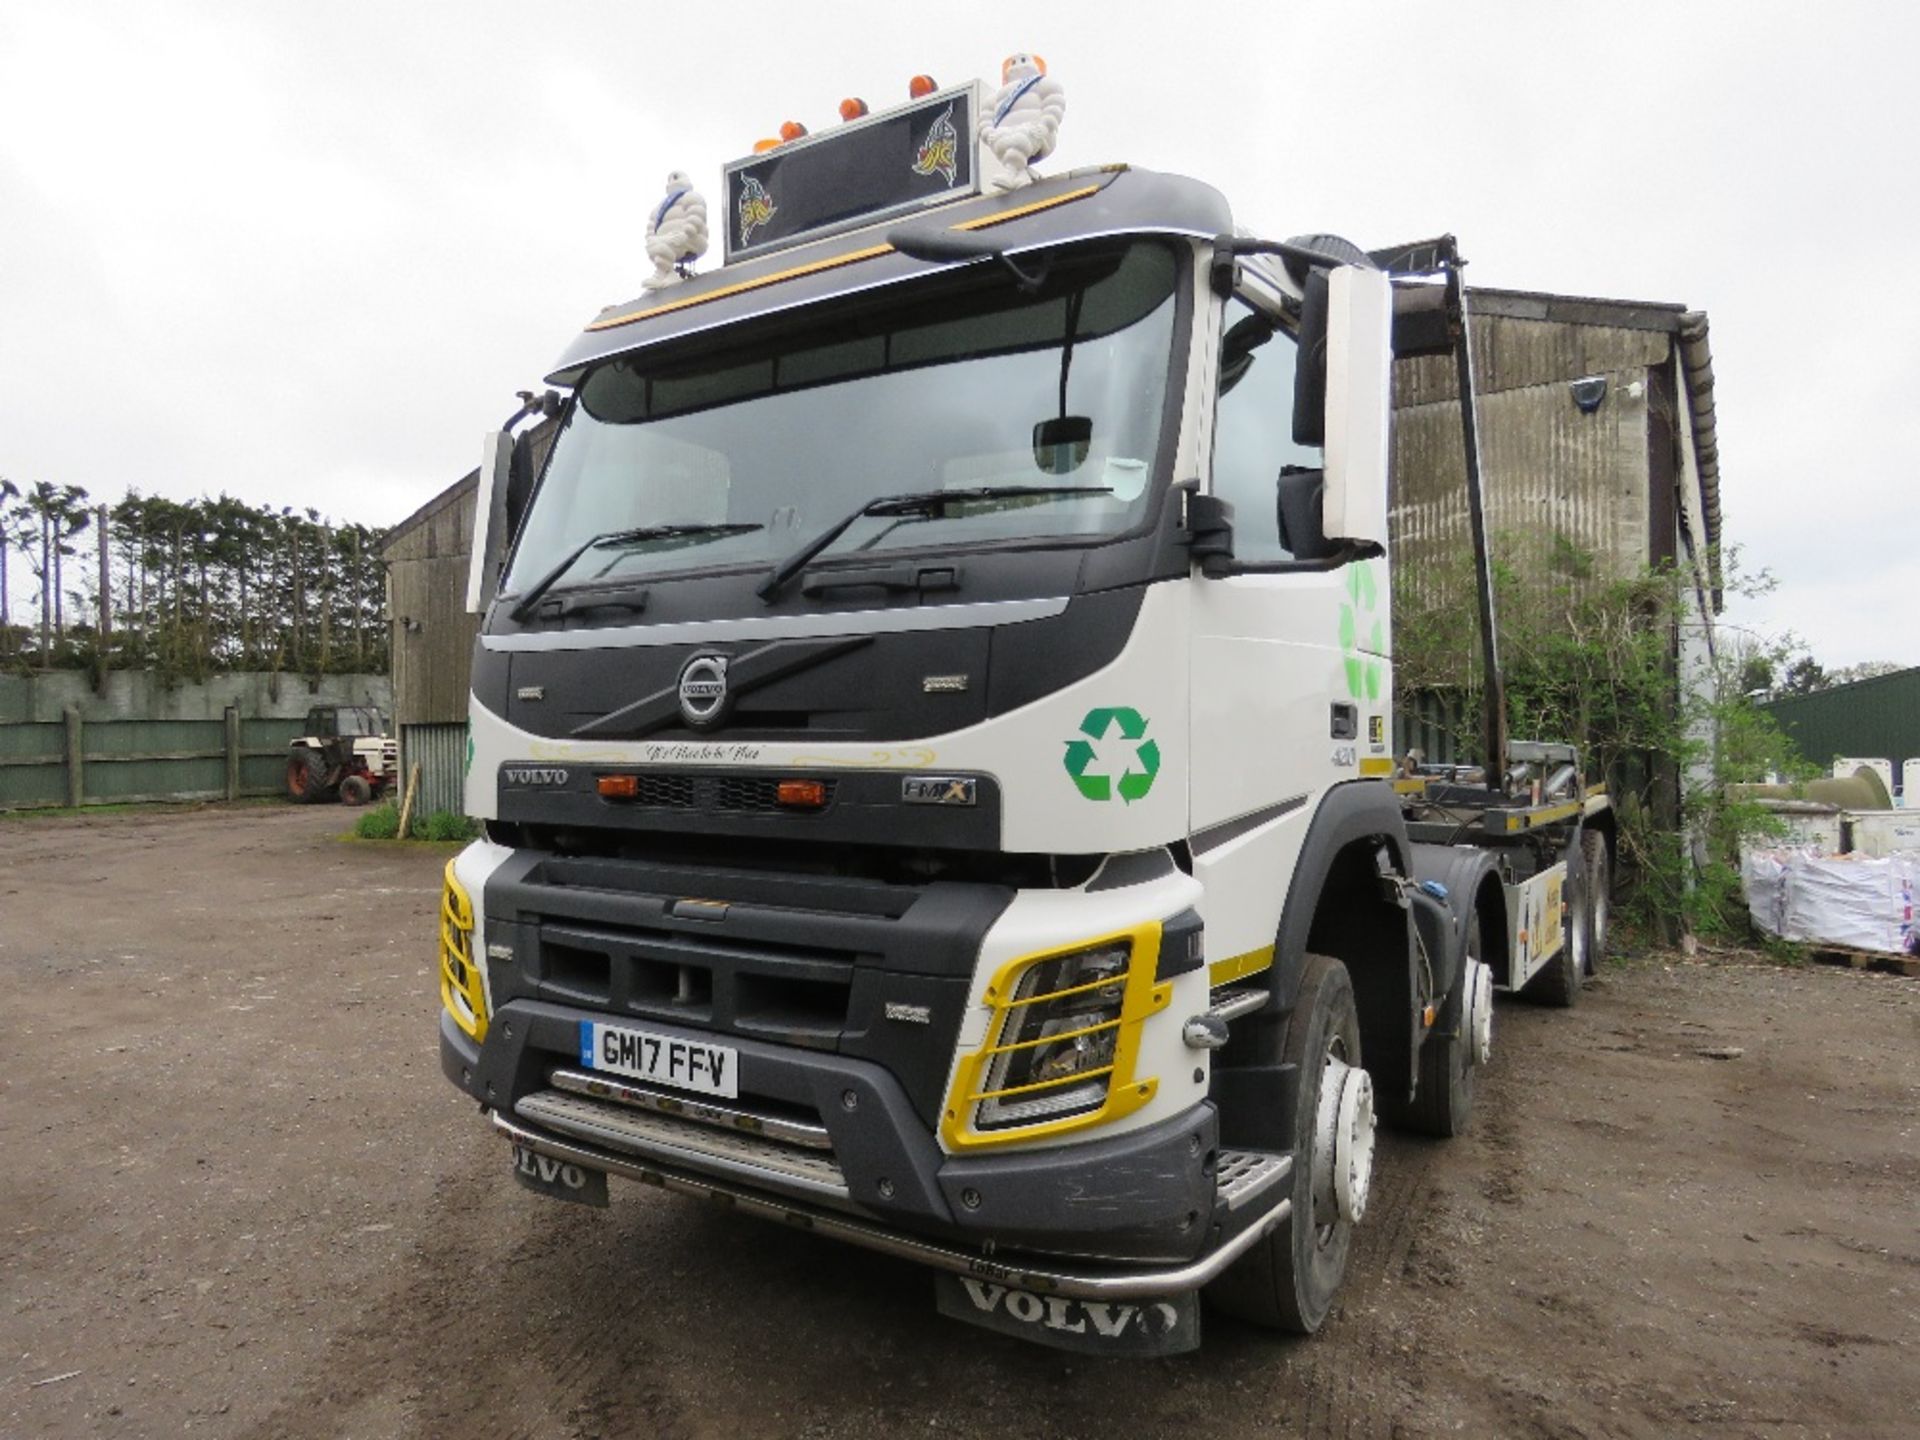 VOLVO FMX420 HOOK LOADER SKIP LORRY, 8X4 REG:GM17 FFV. WITH V5, OWNED BY VENDOR FROM NEW. DIRECT FR - Image 4 of 26